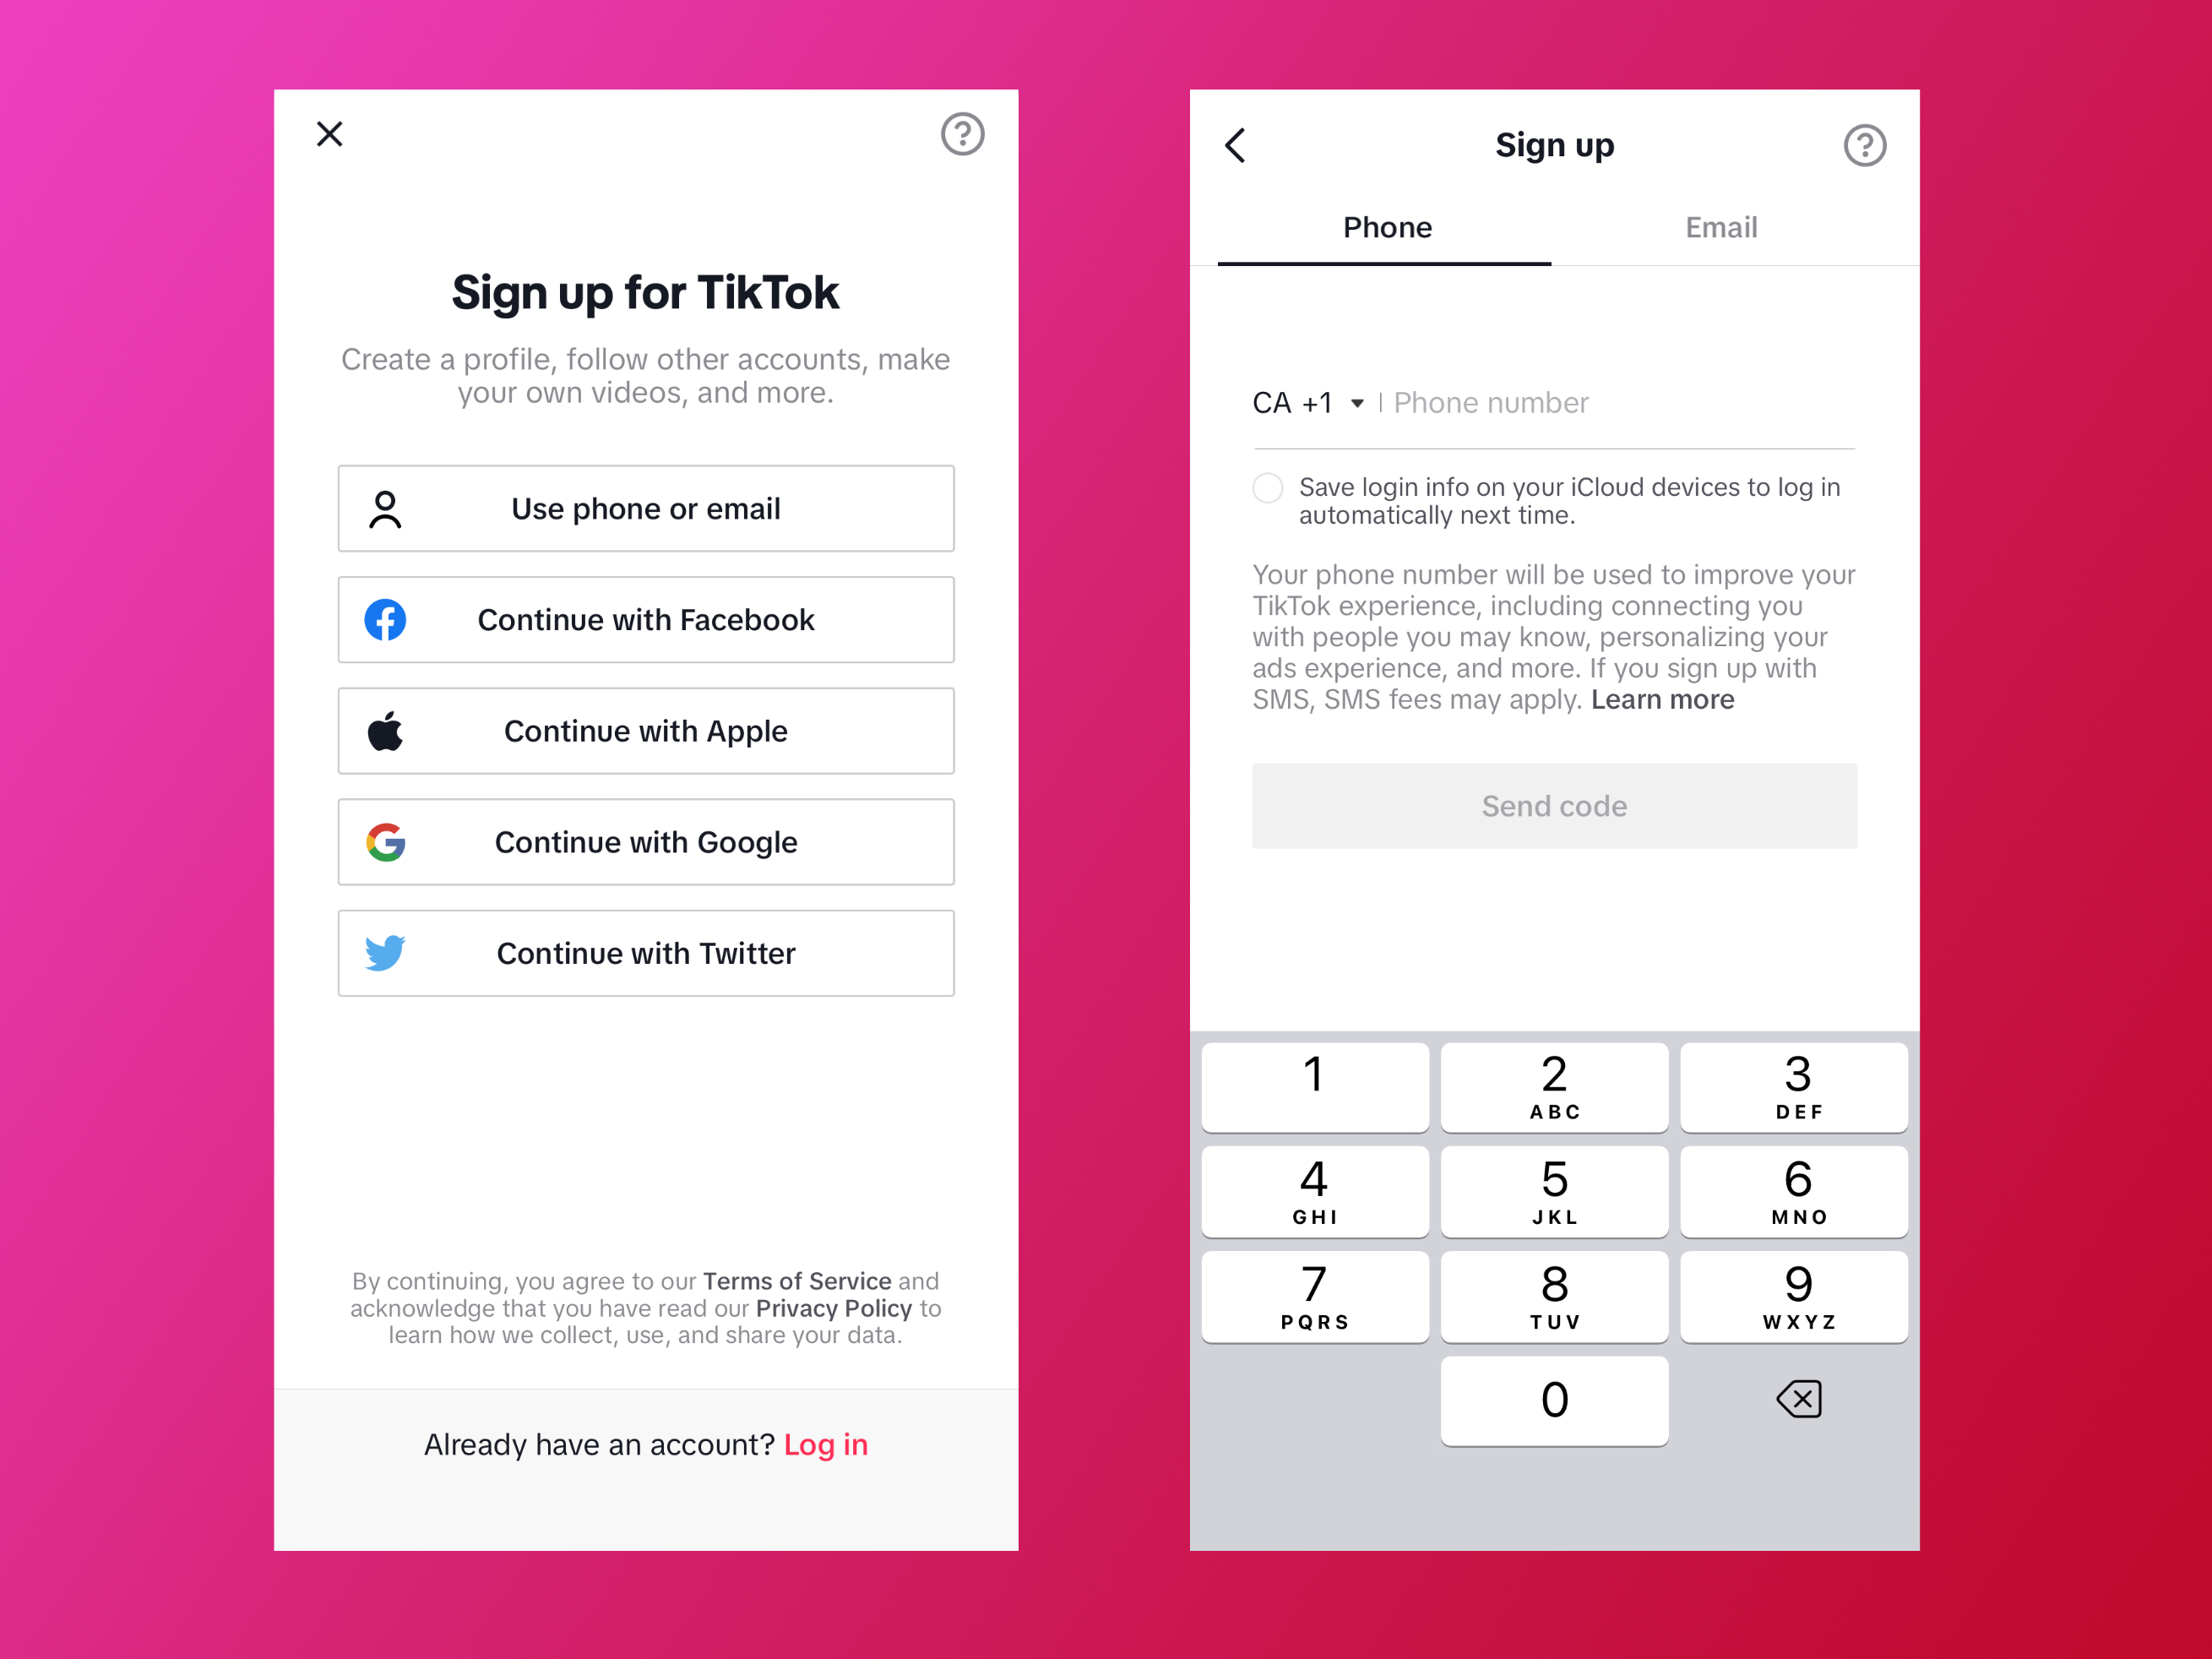 Side by side mobile screen of the TikTok UI showing the sign up flow